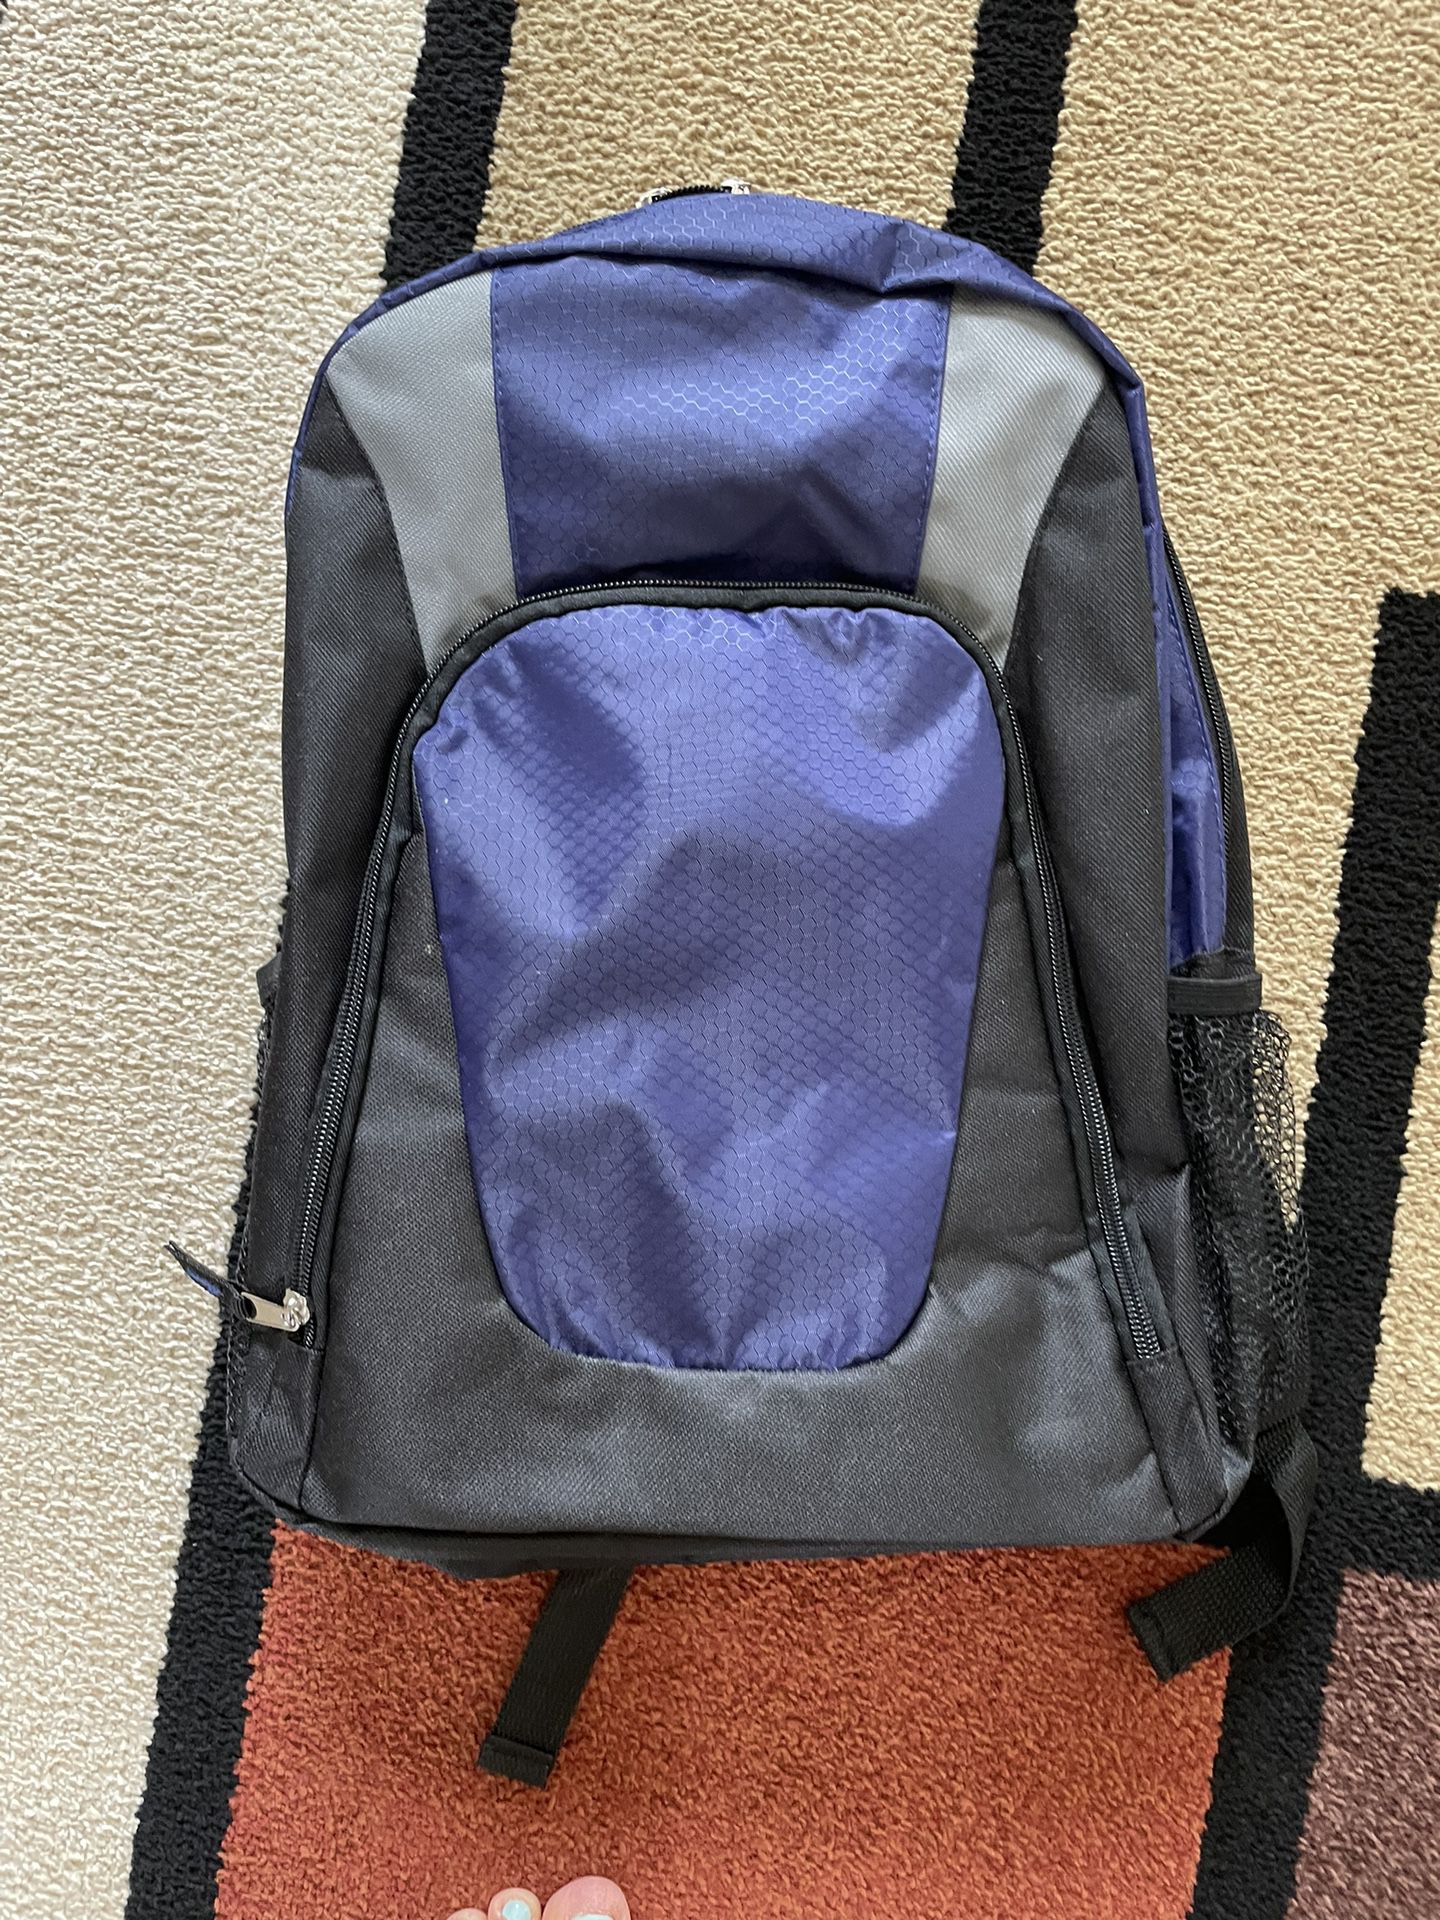 Backpack New 